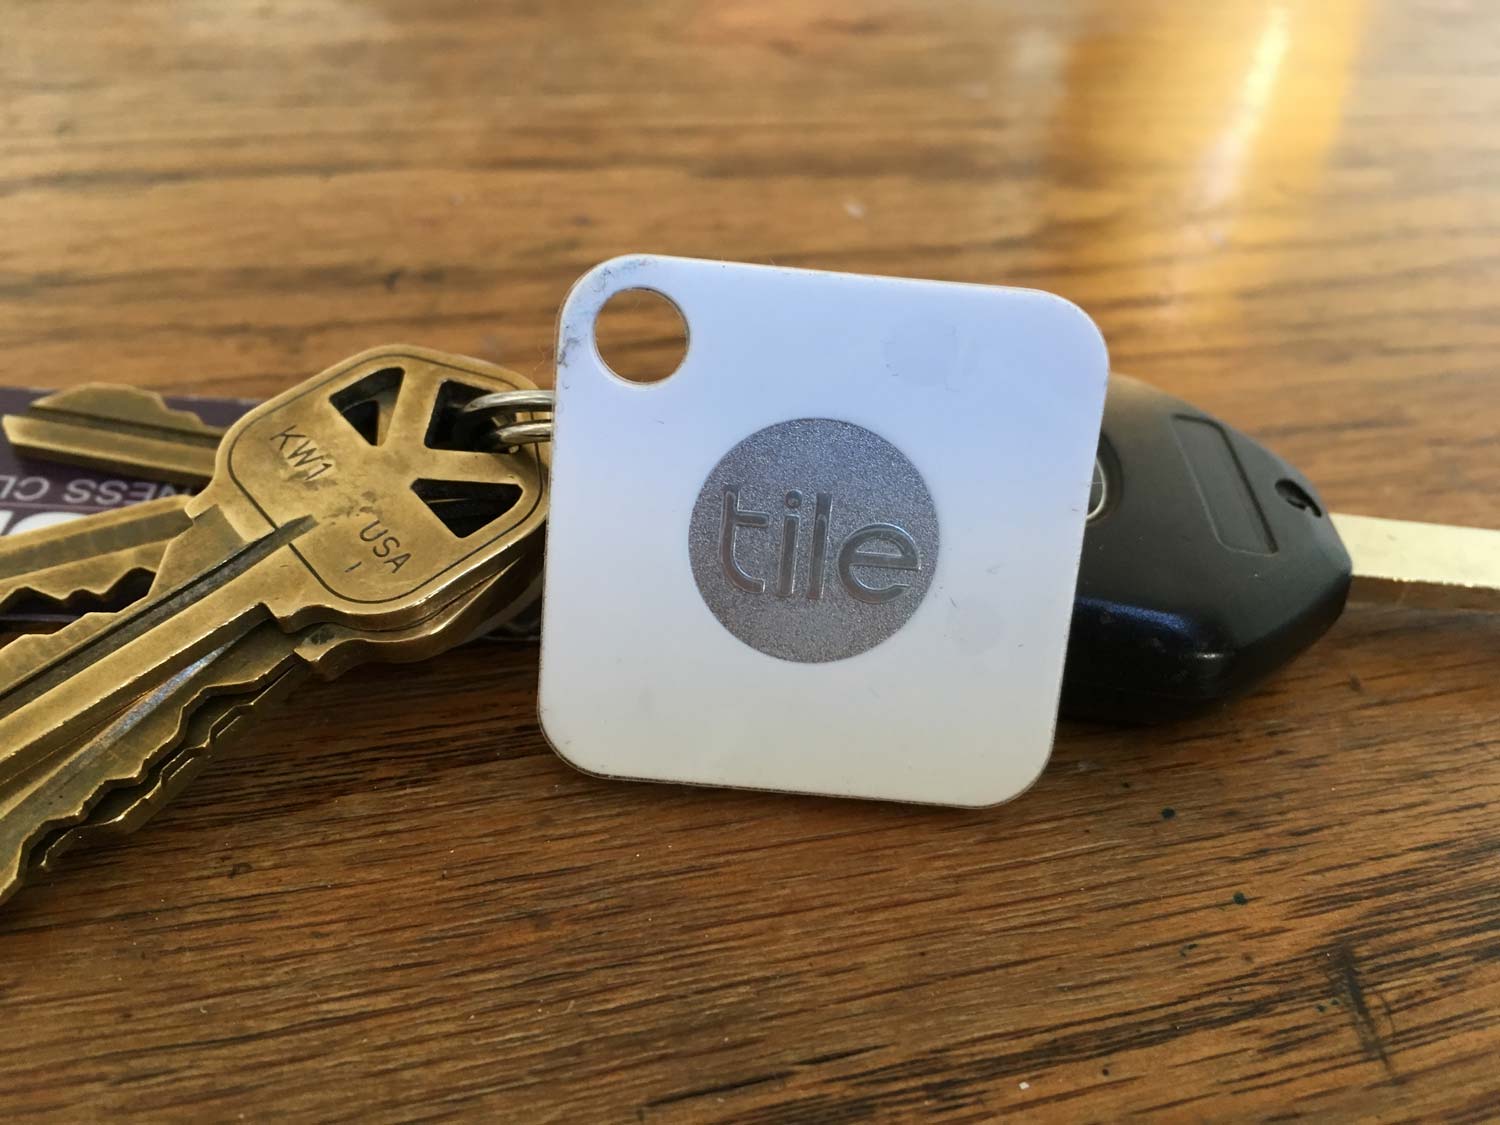 Tile Mate review: A great key finder under $30 Tom's Guide.